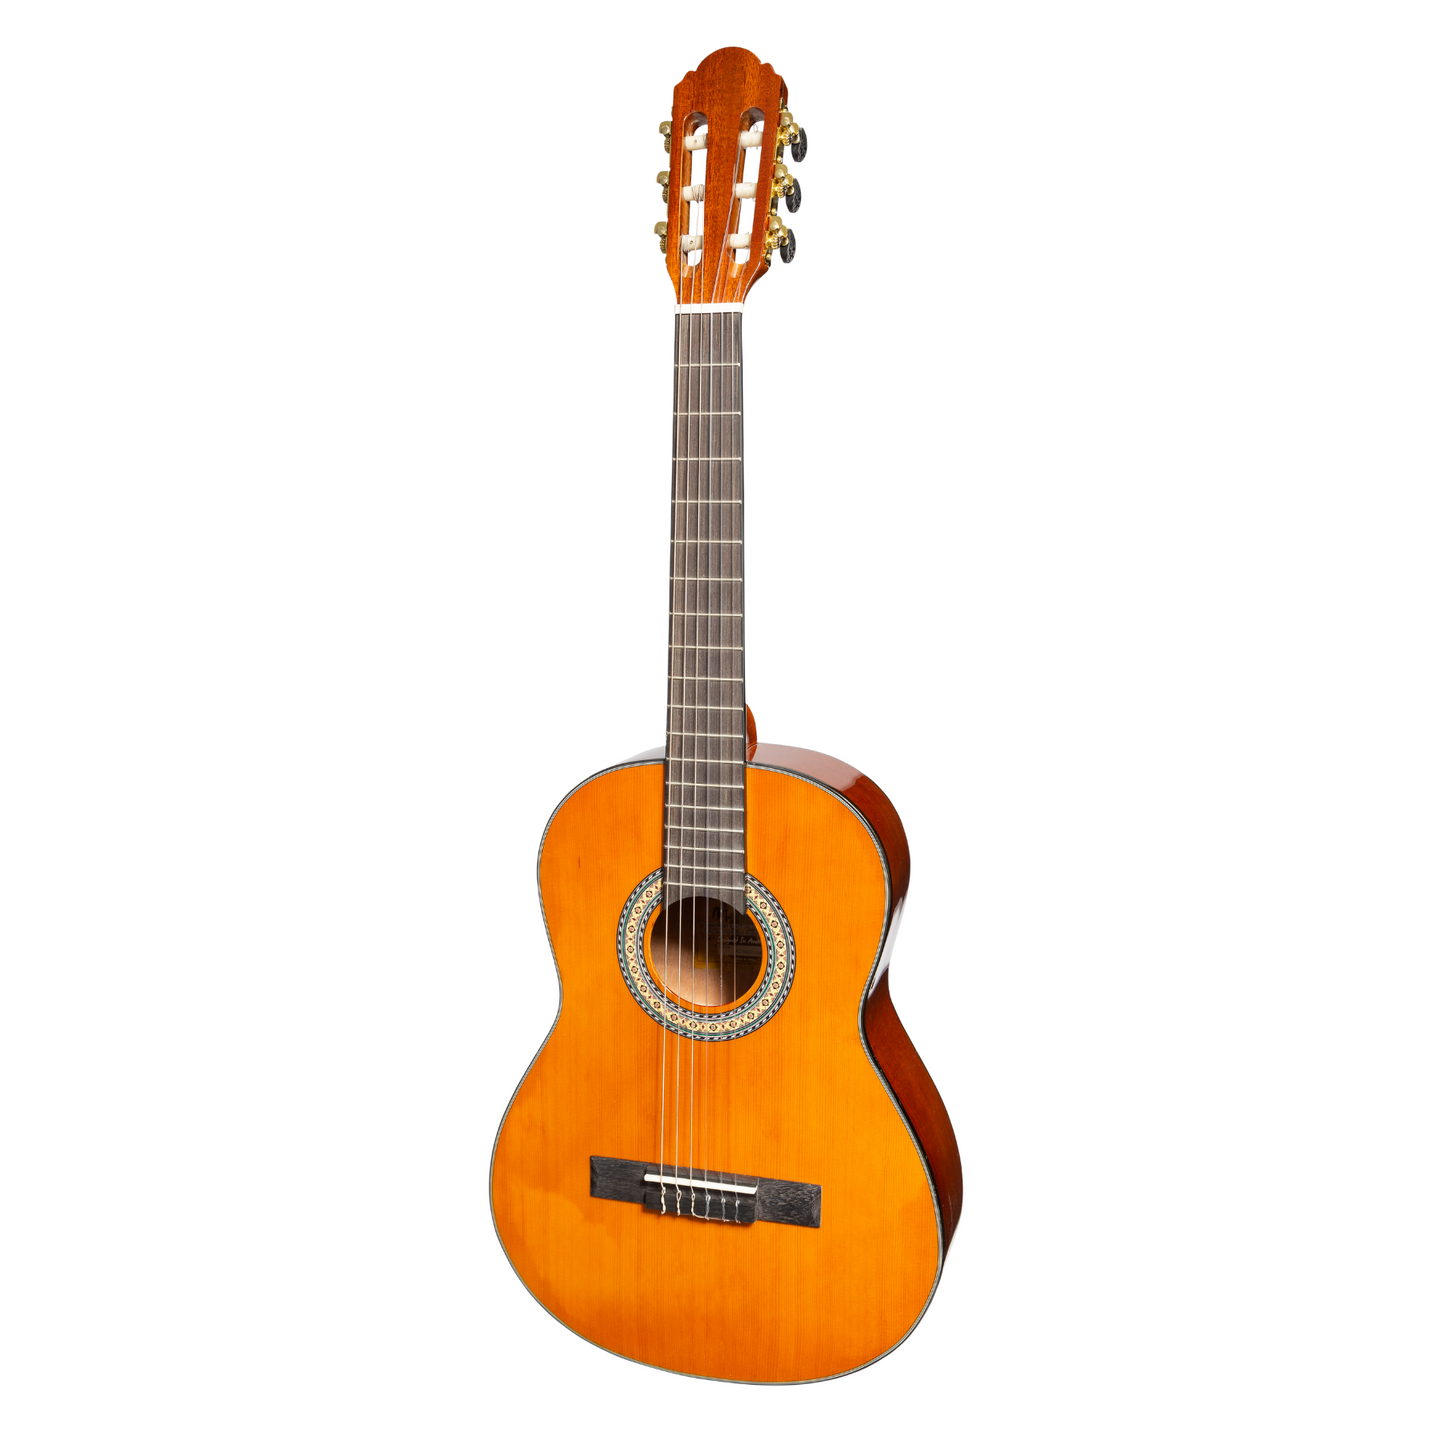 Martinez G-Series 3/4 Size Classical Guitar with Tuner (Amber-Gloss)